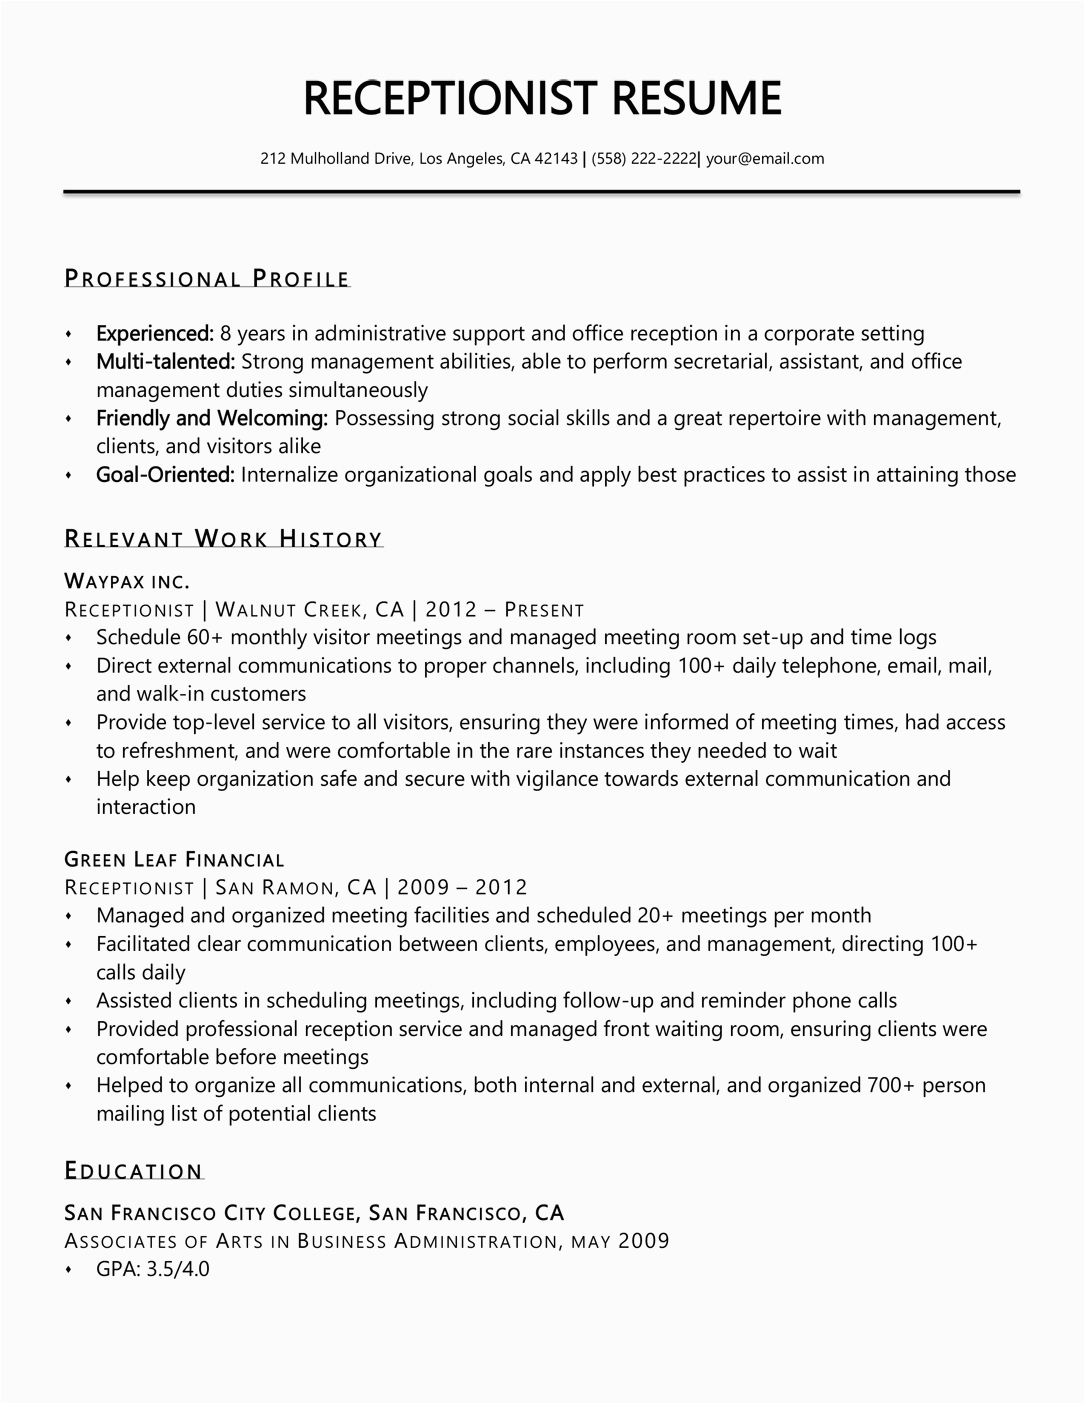 Office assistant and Receptionist Resume Objective Samples Receptionist Resume Sample